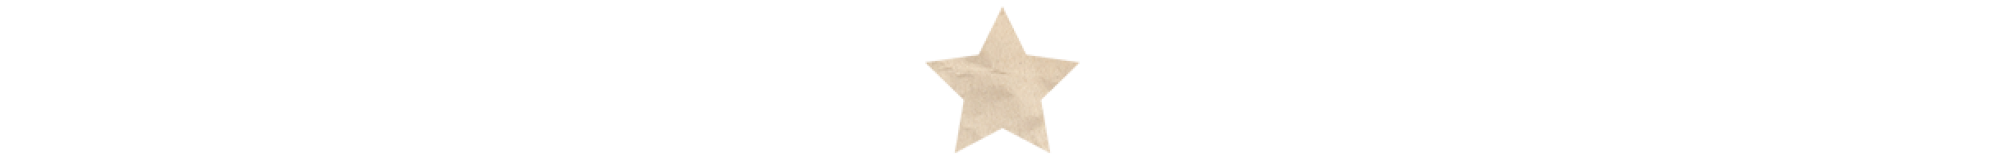 tan paper star section divider